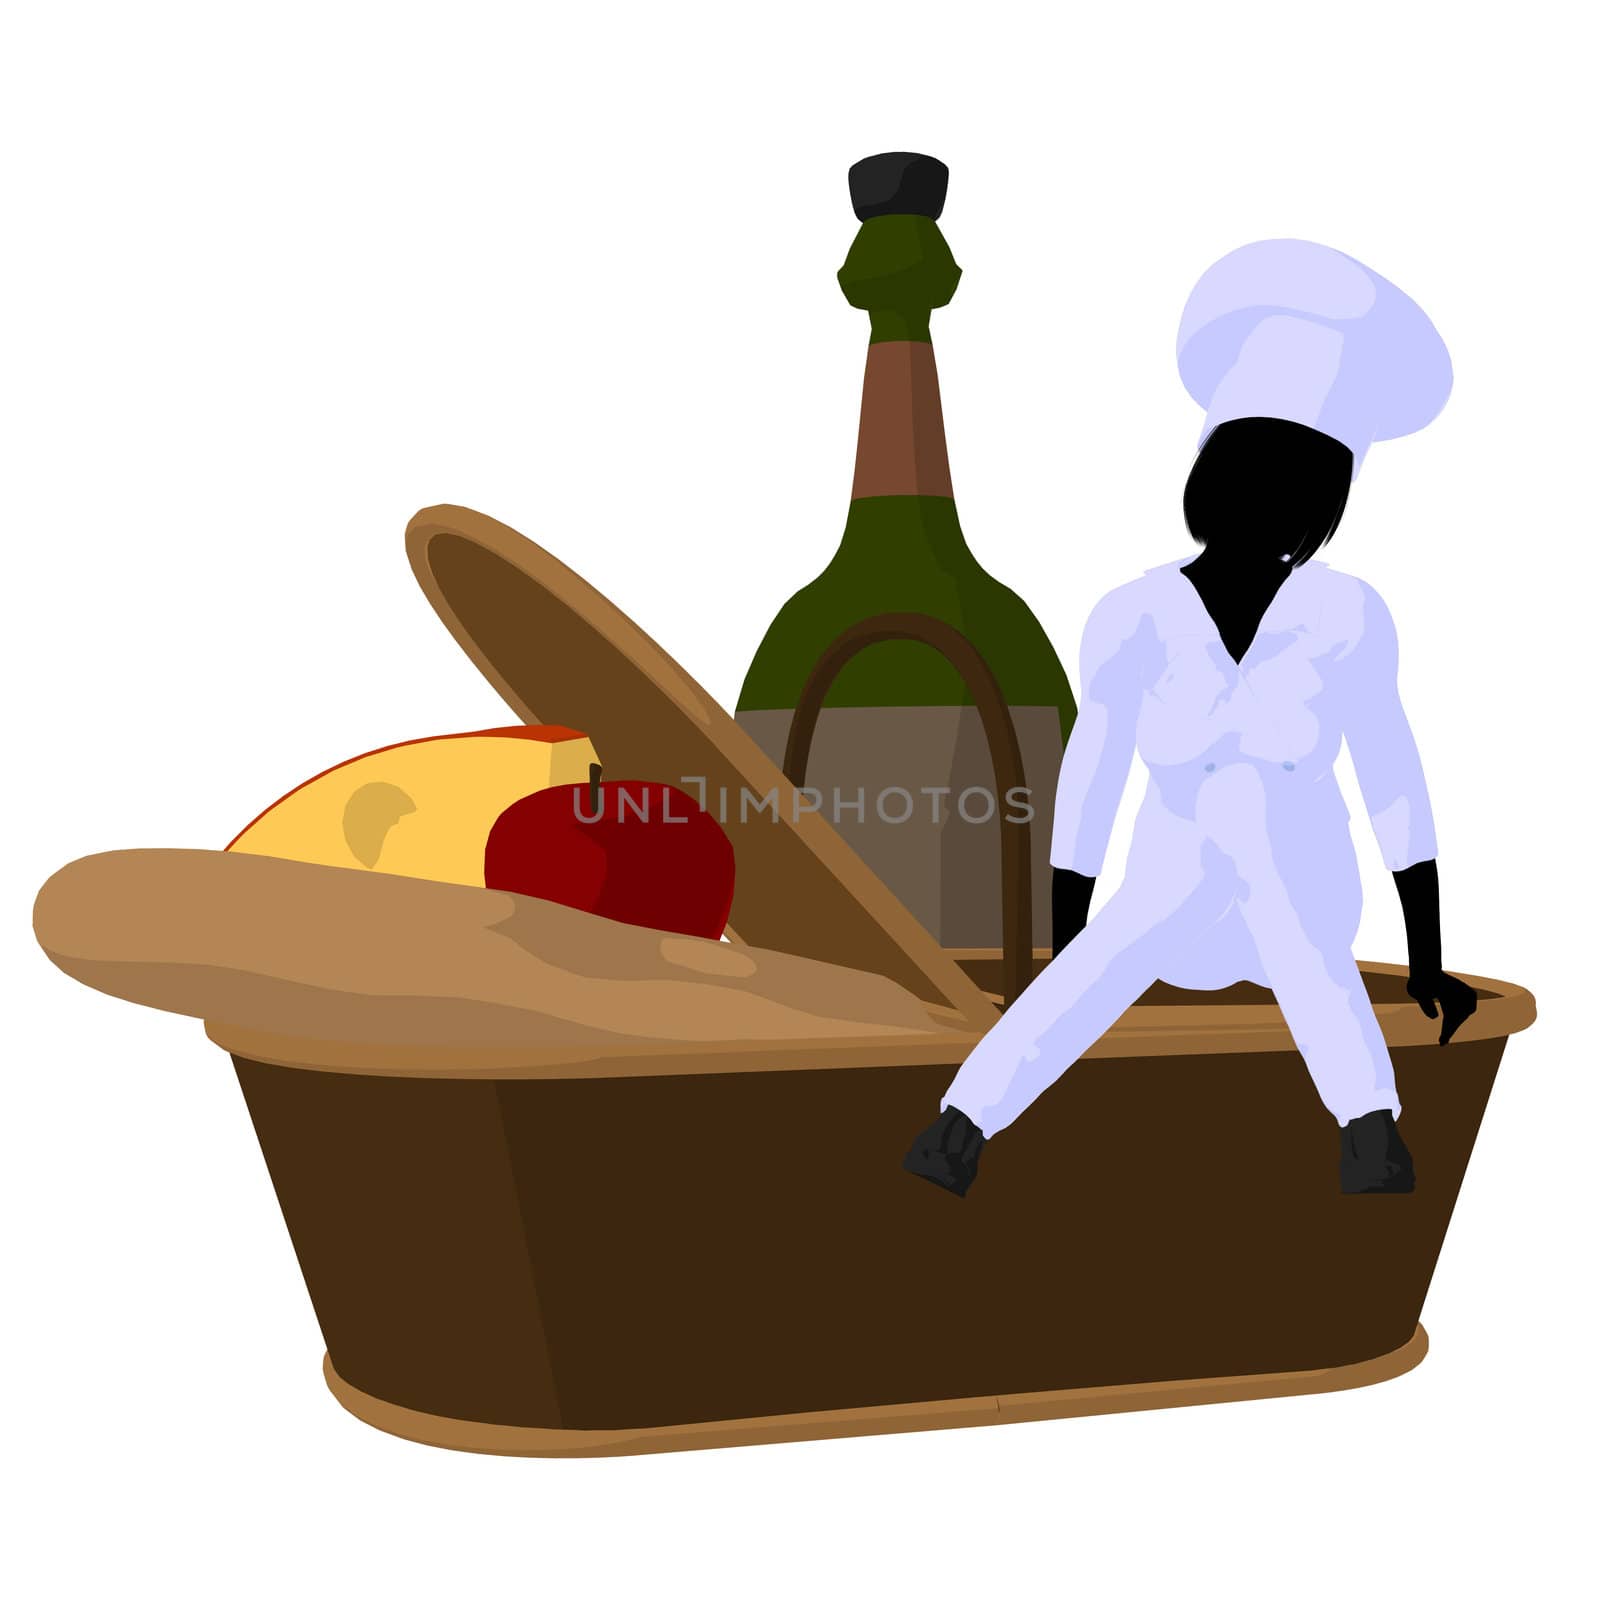 Female chef with a picnic basket silhouette on a white background